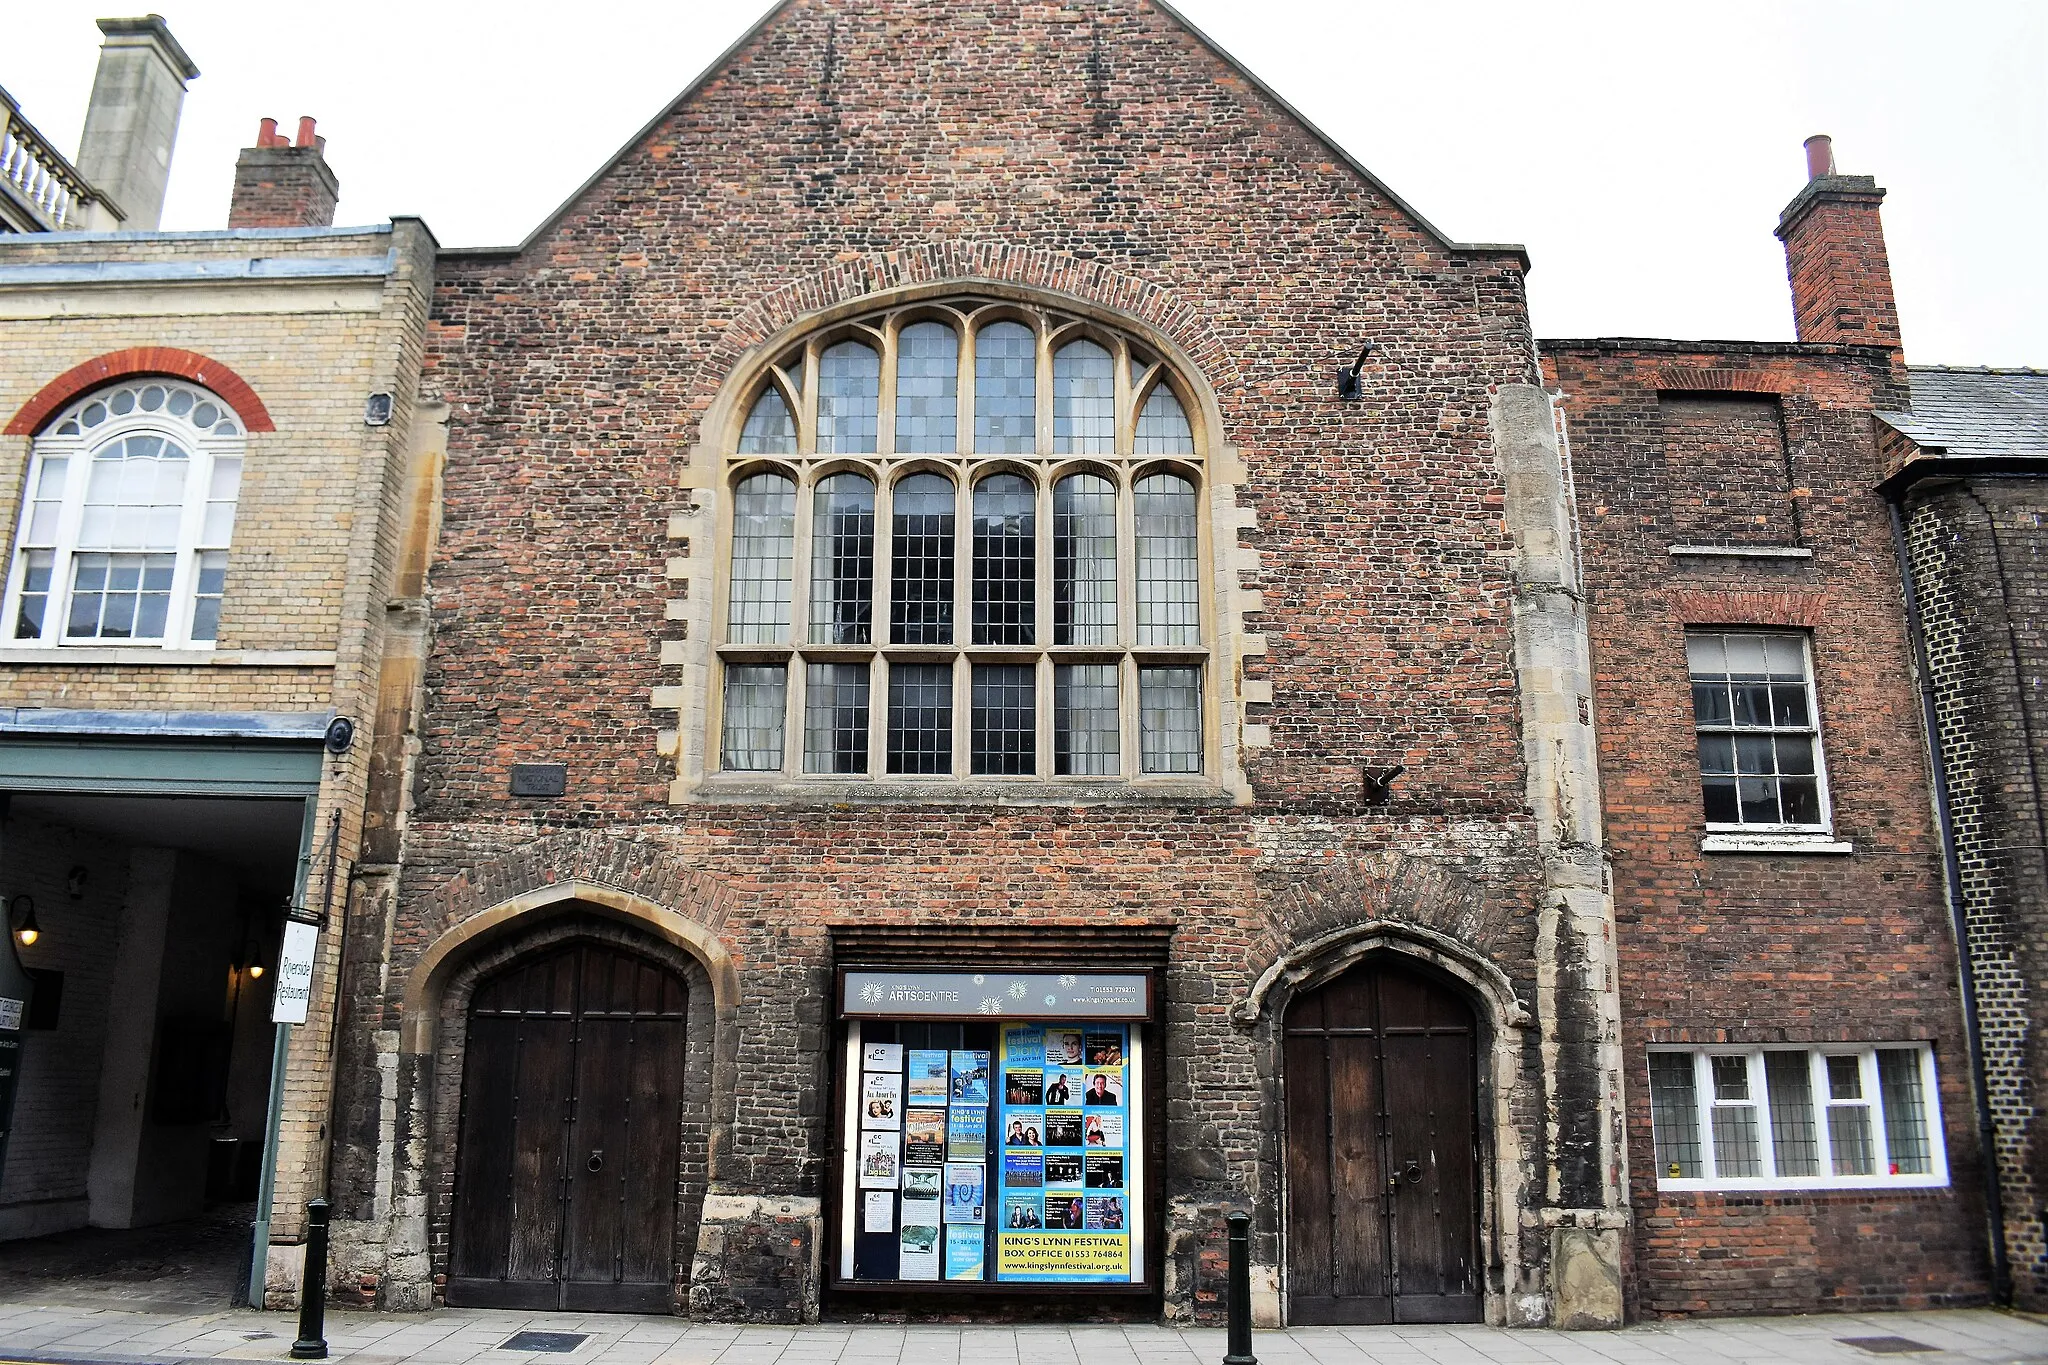 Photo showing: St George's Guildhall, King Street, King's Lynn.
The Guildhall was built on a newly reclaimed quay on the banks of the River Ouse that was gifted to the Guild of St George in 1406.